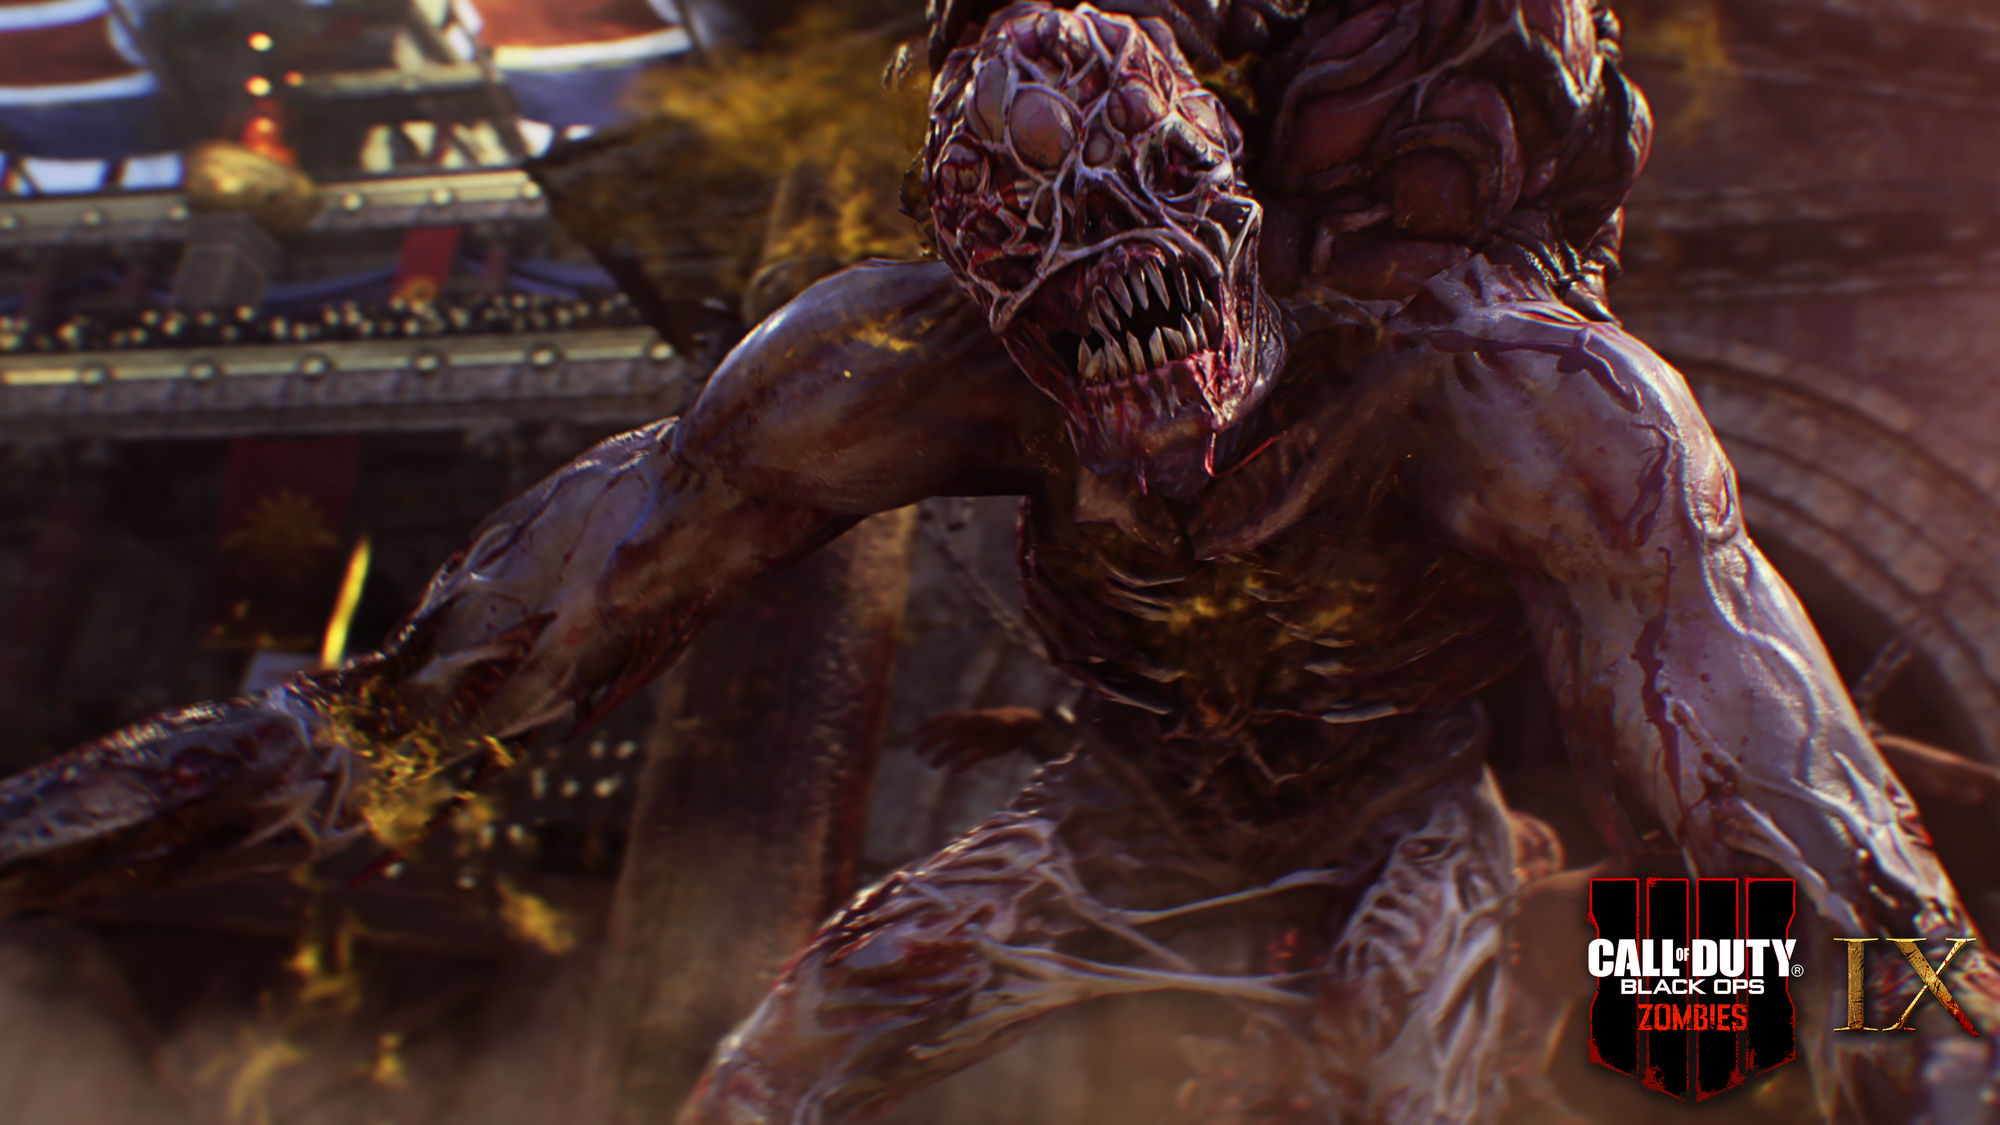 Call of Duty: Black Ops 4 Update Zombies patch notes